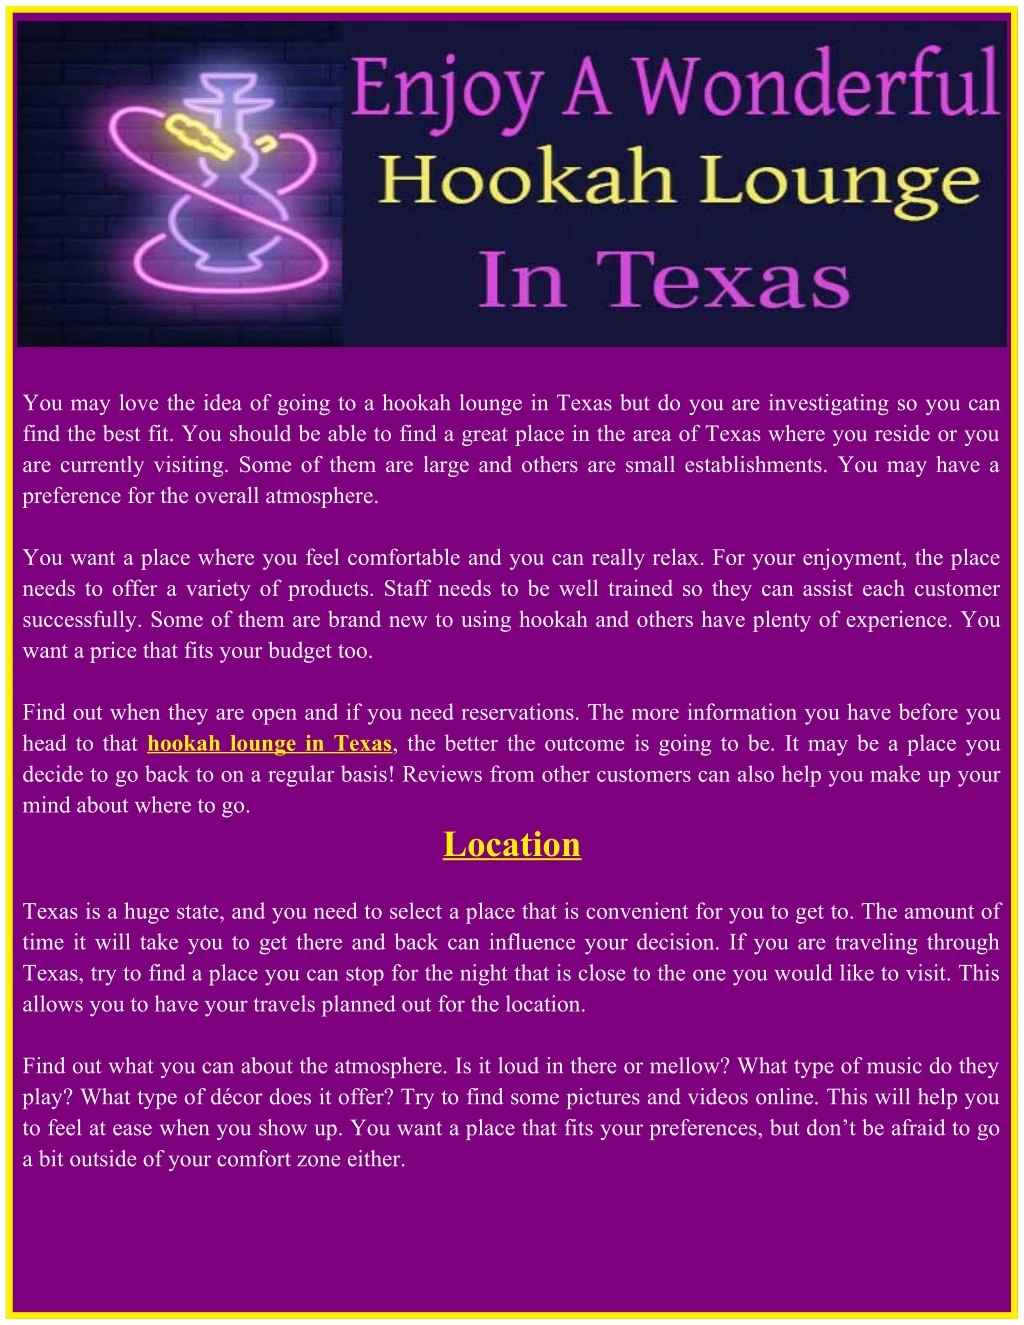 you may love the idea of going to a hookah lounge